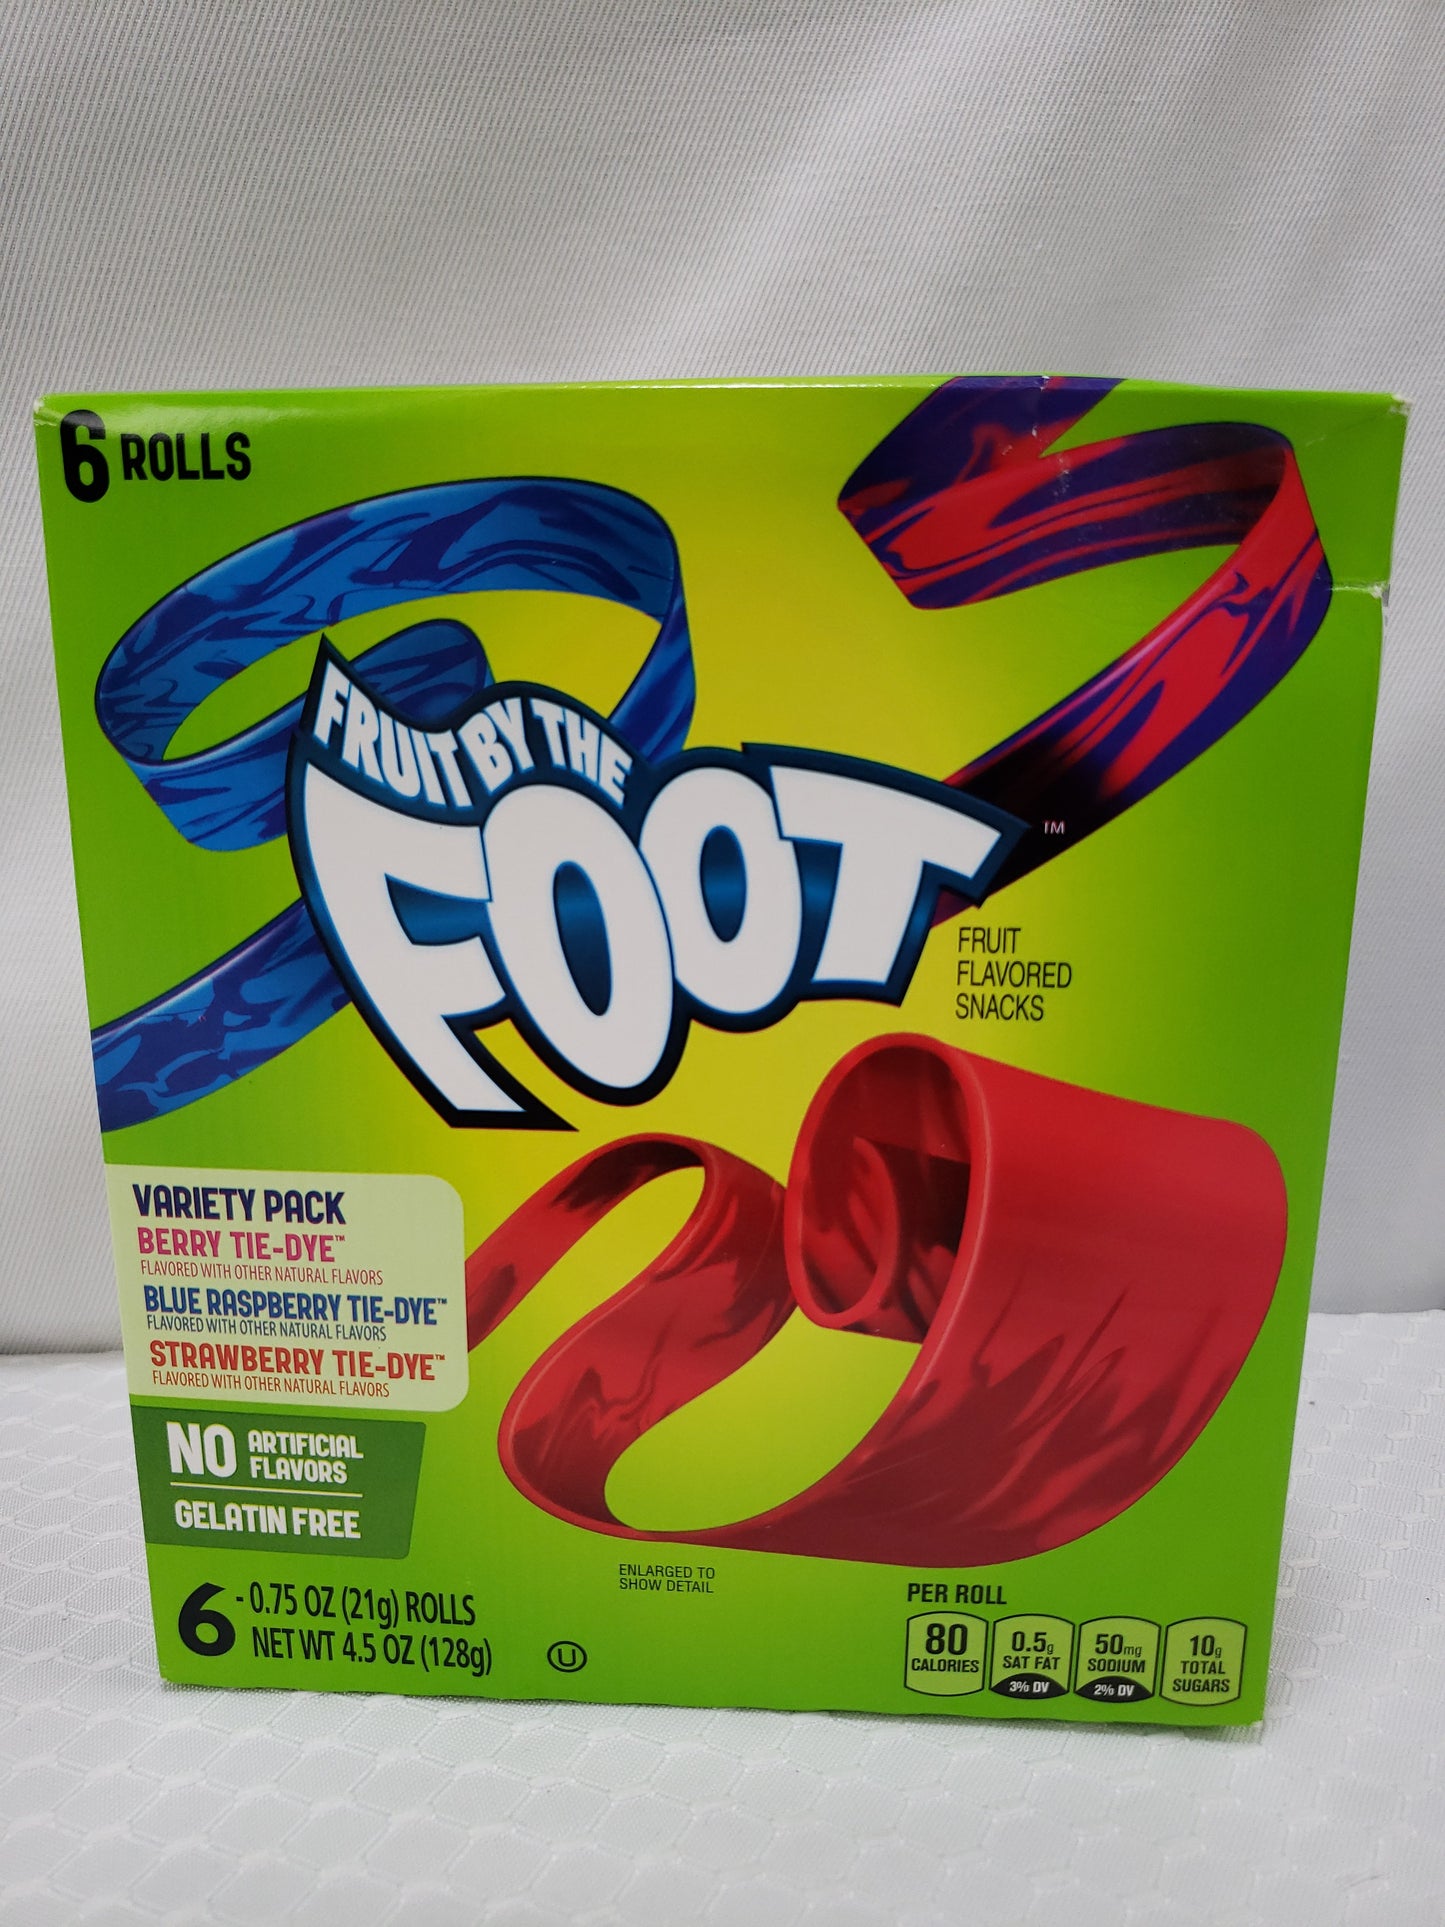 FRUIT BY THE FOOT FRUIT FLAVORED SNACKS 6 ROLLS 4.5 0Z VARIETY PACK